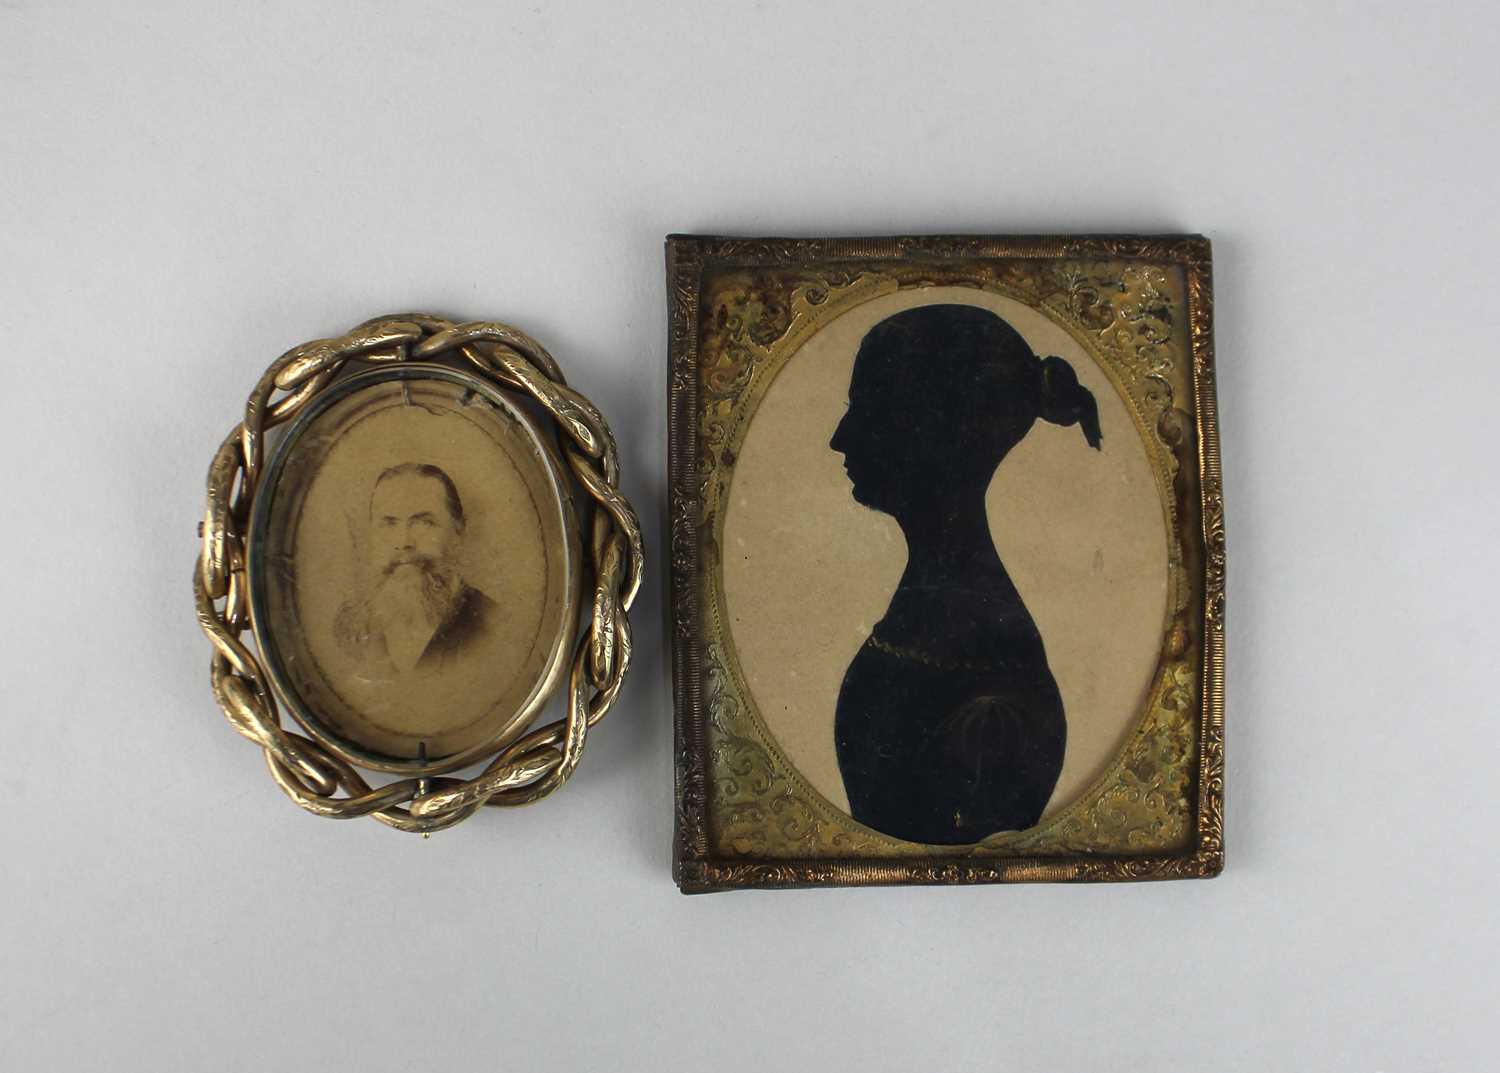 F W Seville (1797-1866), bronzed silhouette of a lady, verso indistinctly inscribed in pencil and